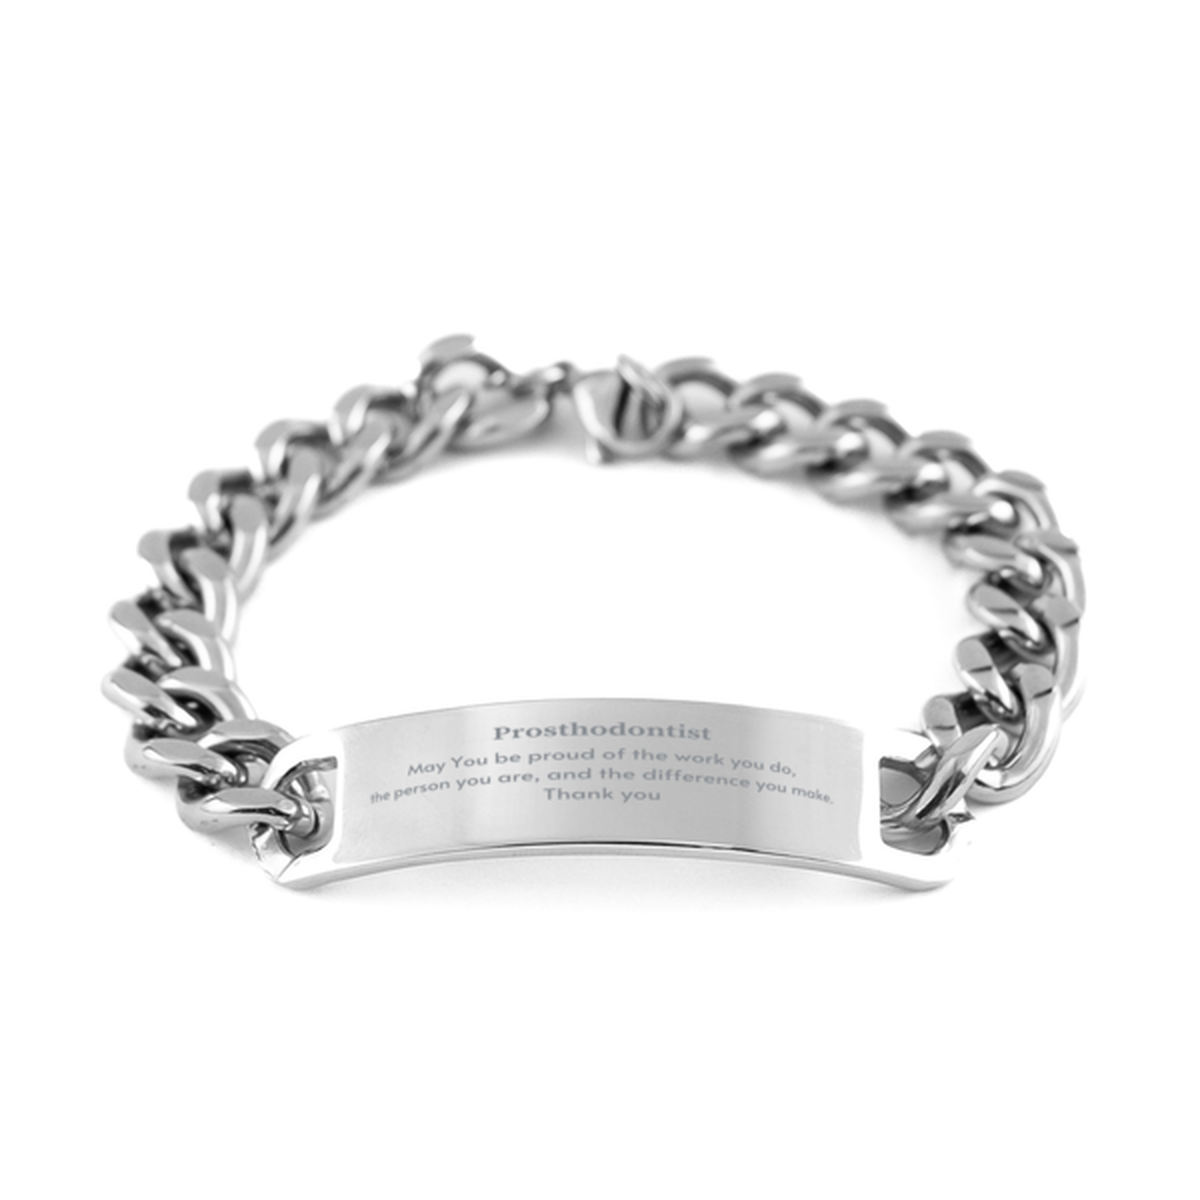 Heartwarming Cuban Chain Stainless Steel Bracelet Retirement Coworkers Gifts for Prosthodontist, Prosthodontist May You be proud of the work you do, the person you are Gifts for Boss Men Women Friends